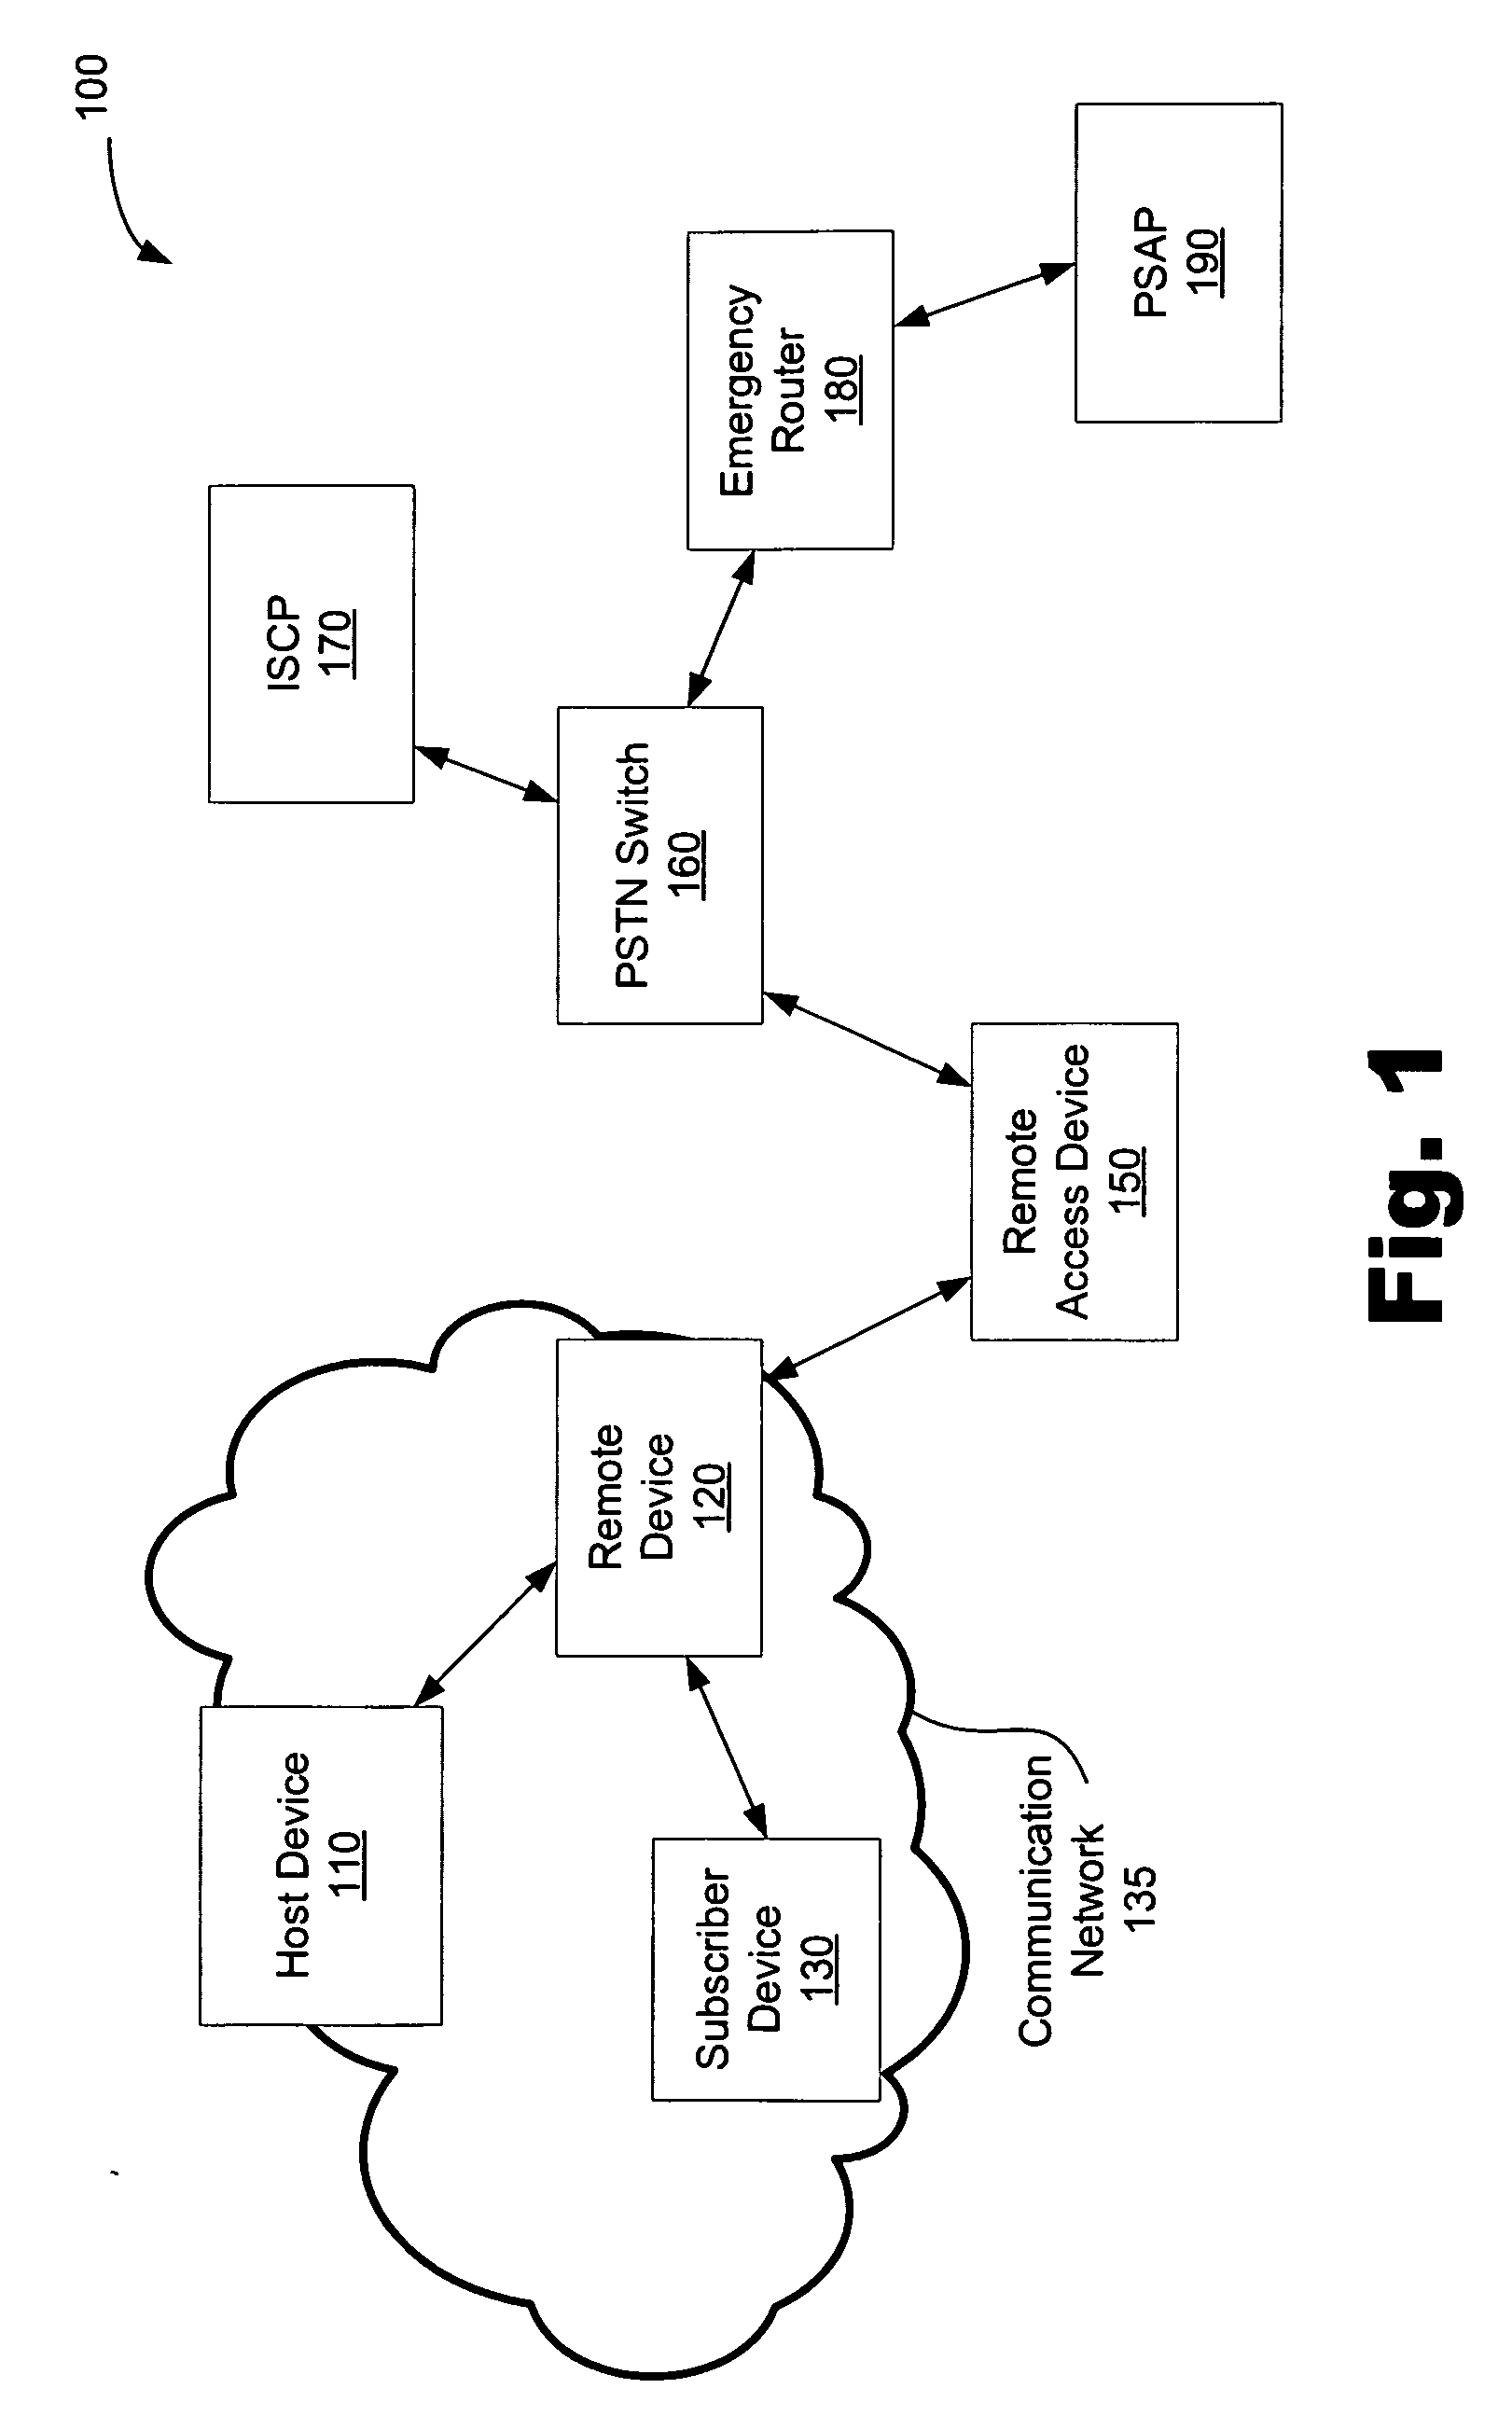 Systems and methods for routing emergency communications